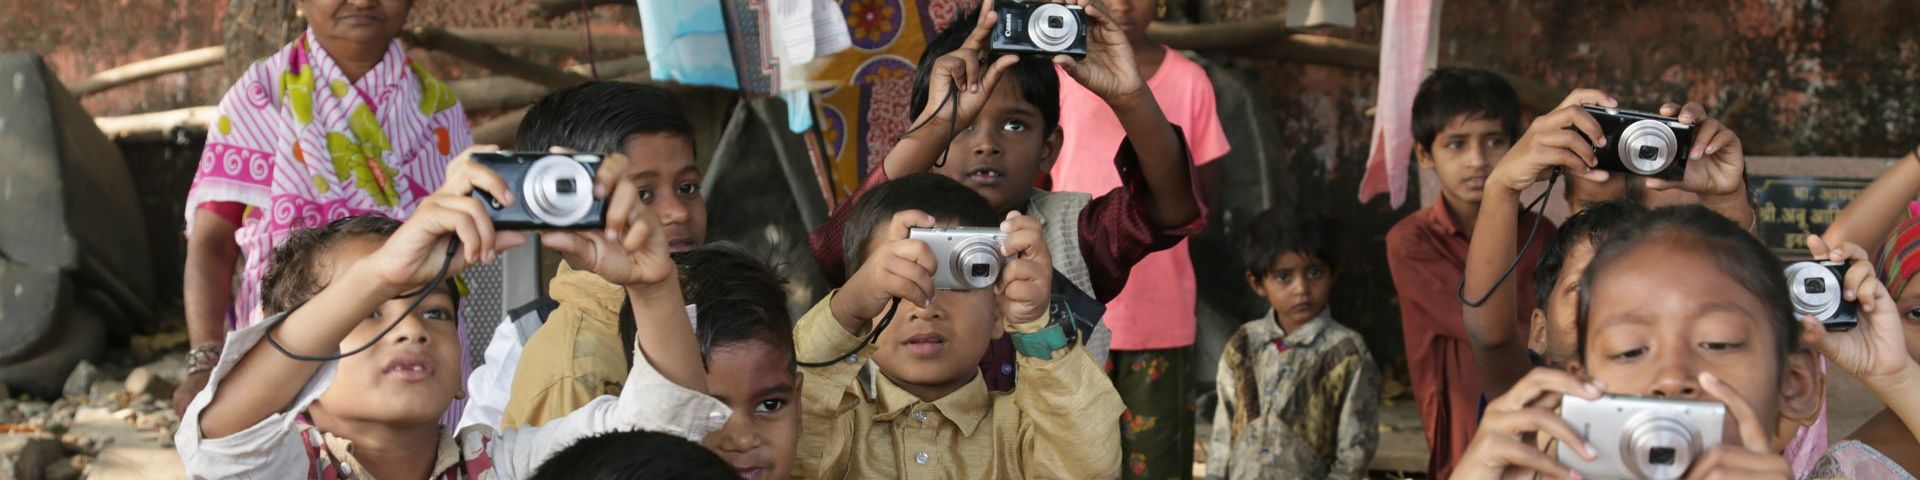  Little children in a group, holding their Canon cameras up to take a photo.